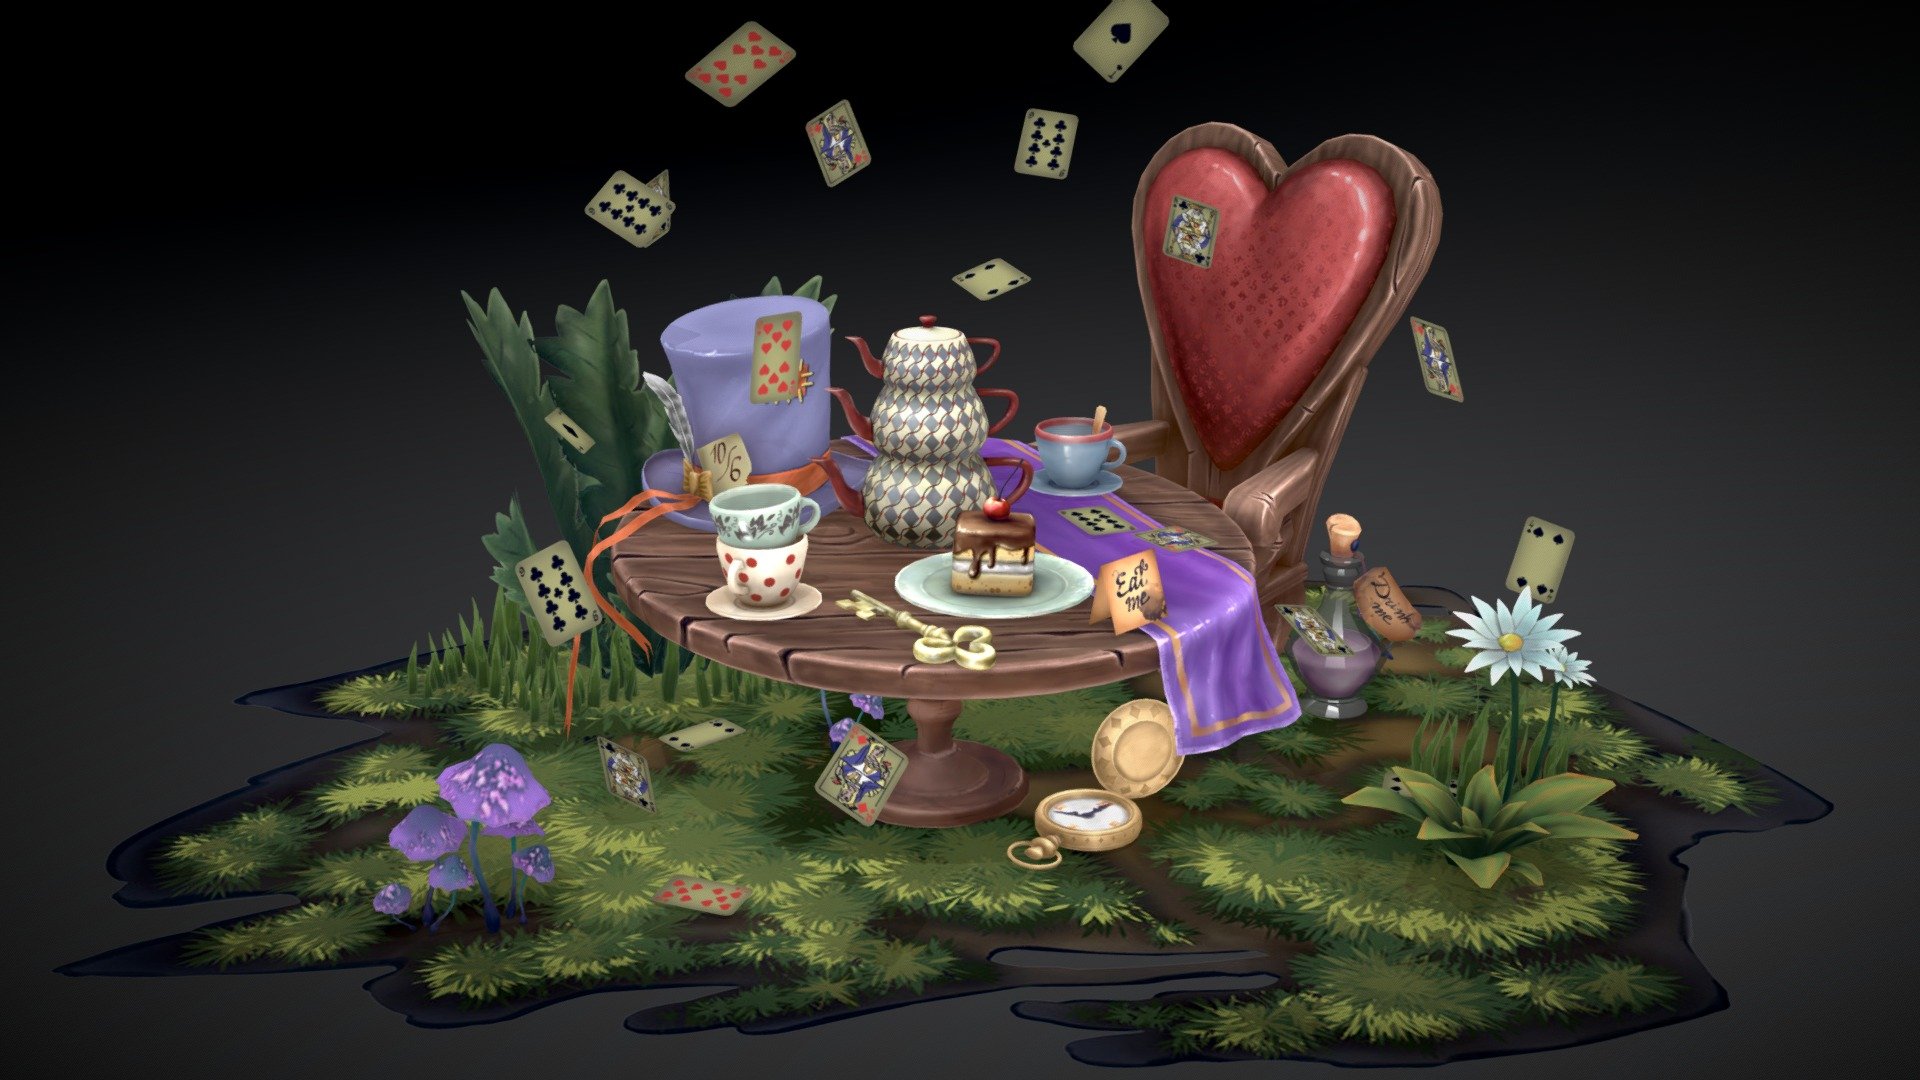 I am just a fan of Alice in Wonderland =)
All textures are drawn by me 3d model